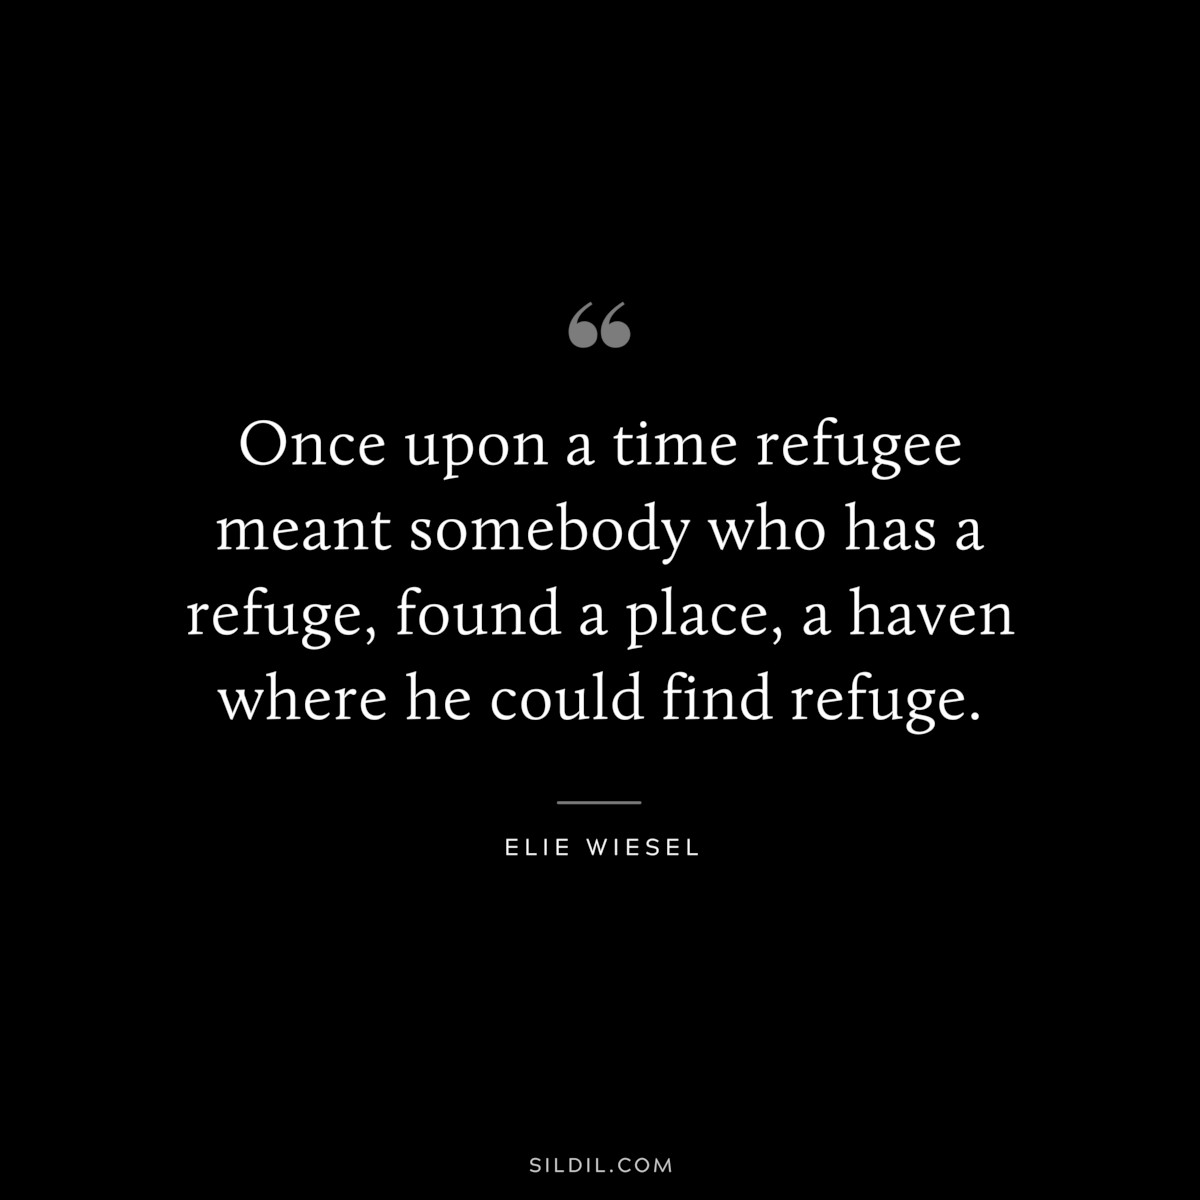 Once upon a time refugee meant somebody who has a refuge, found a place, a haven where he could find refuge. ― Elie Wiesel